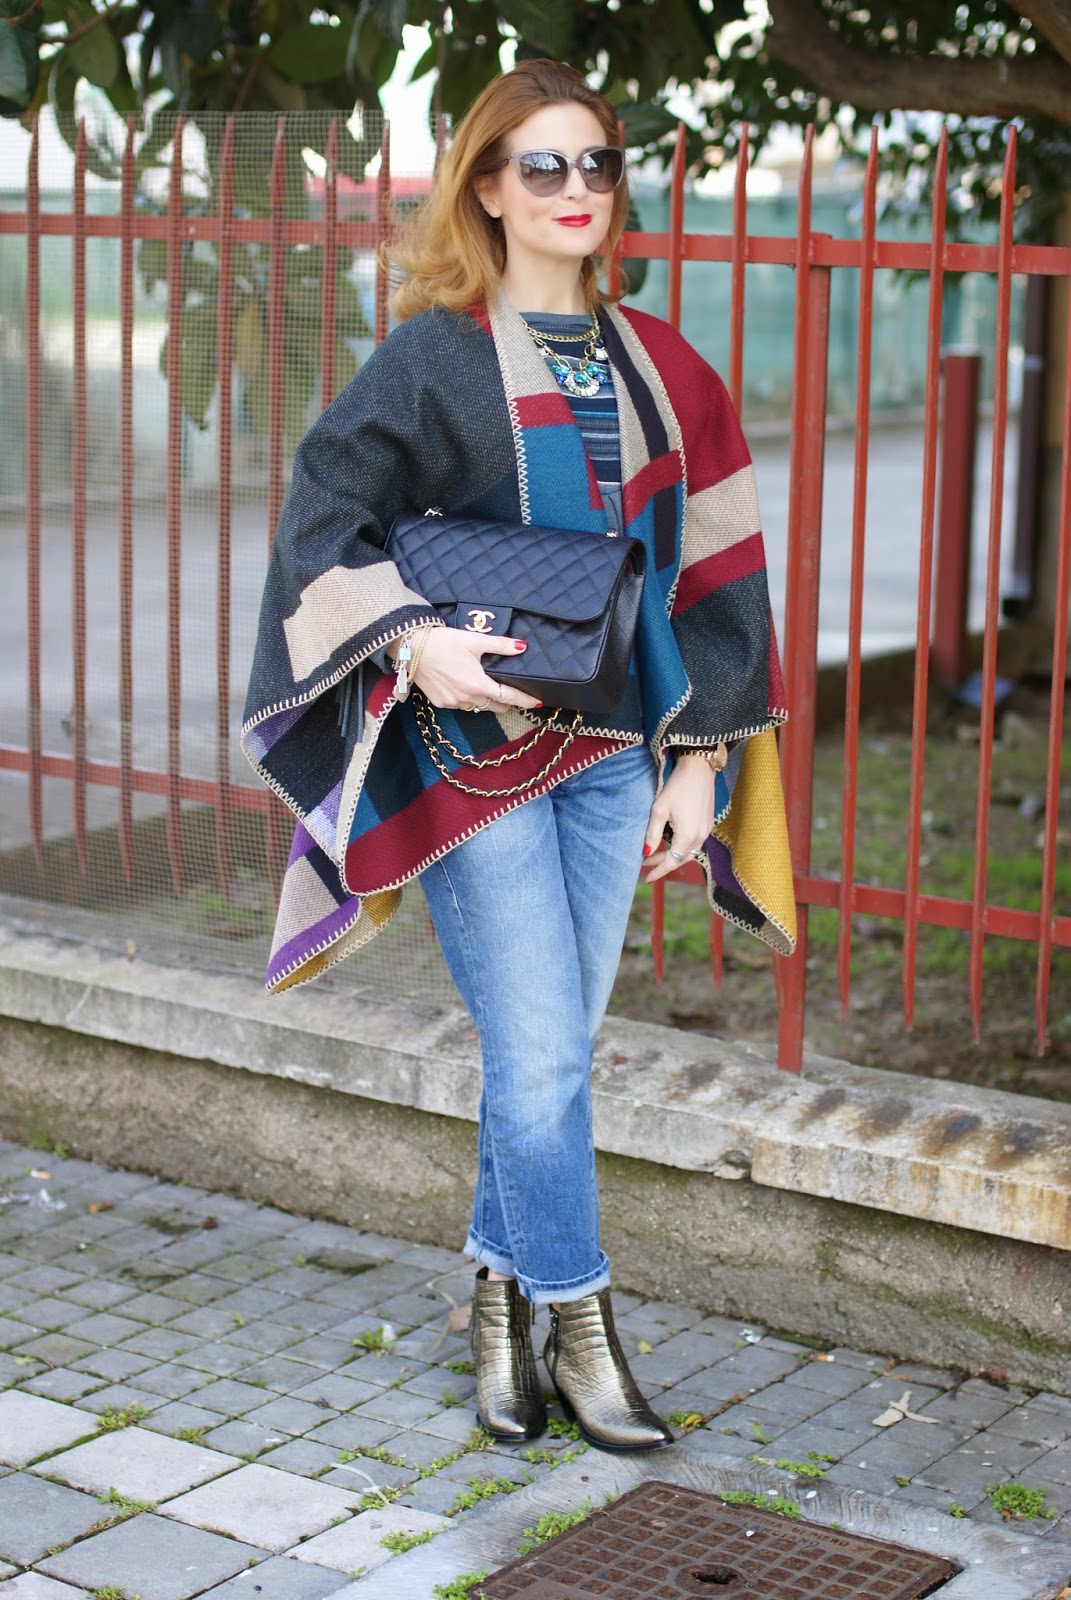 Cowboy chic style, Zara fringed sweater, Oasap cape, Burberry style, Chanel 2.55 bag, Fashion and Cookies fashion blog, fashion blogger